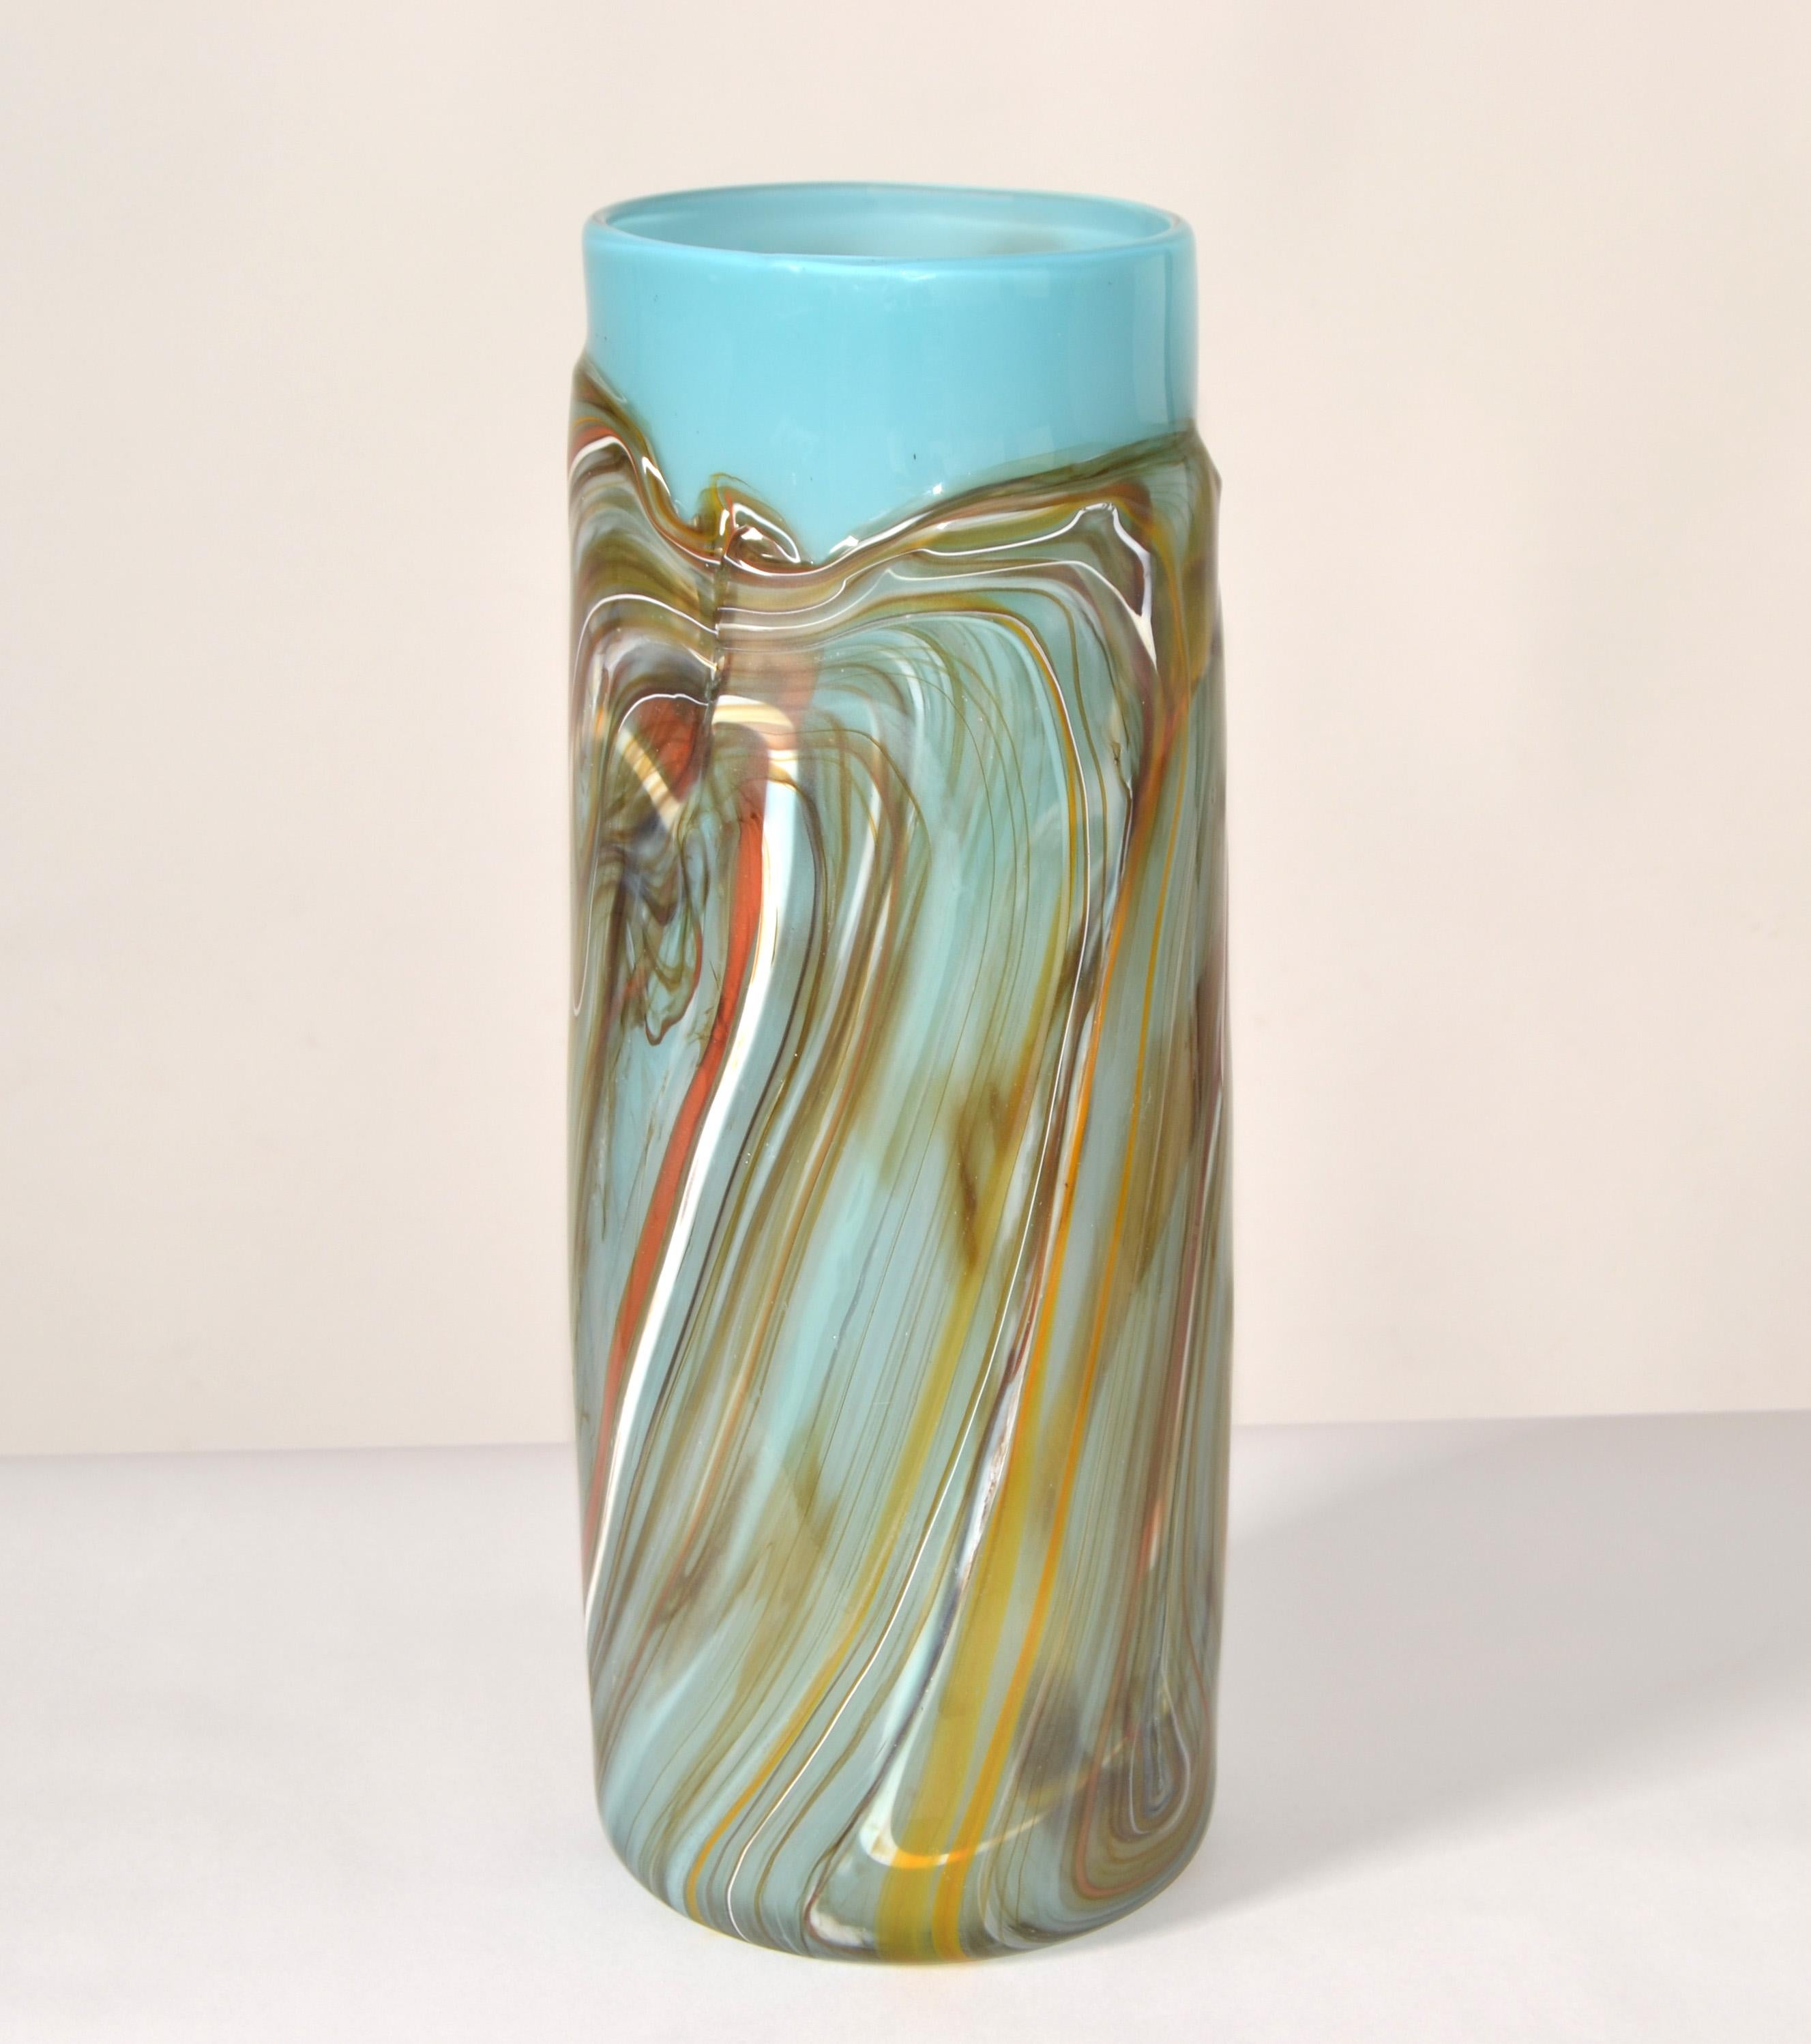 Heavy tall blown Art Glass Studio Piece Vase, Vessel encased in turquoise Glass with Swirls of taupe, brown, white and orange Glass.
Mid-Century Modern Period in a minimalism Style for a larger arrangement of Flowers. 
No Markings.